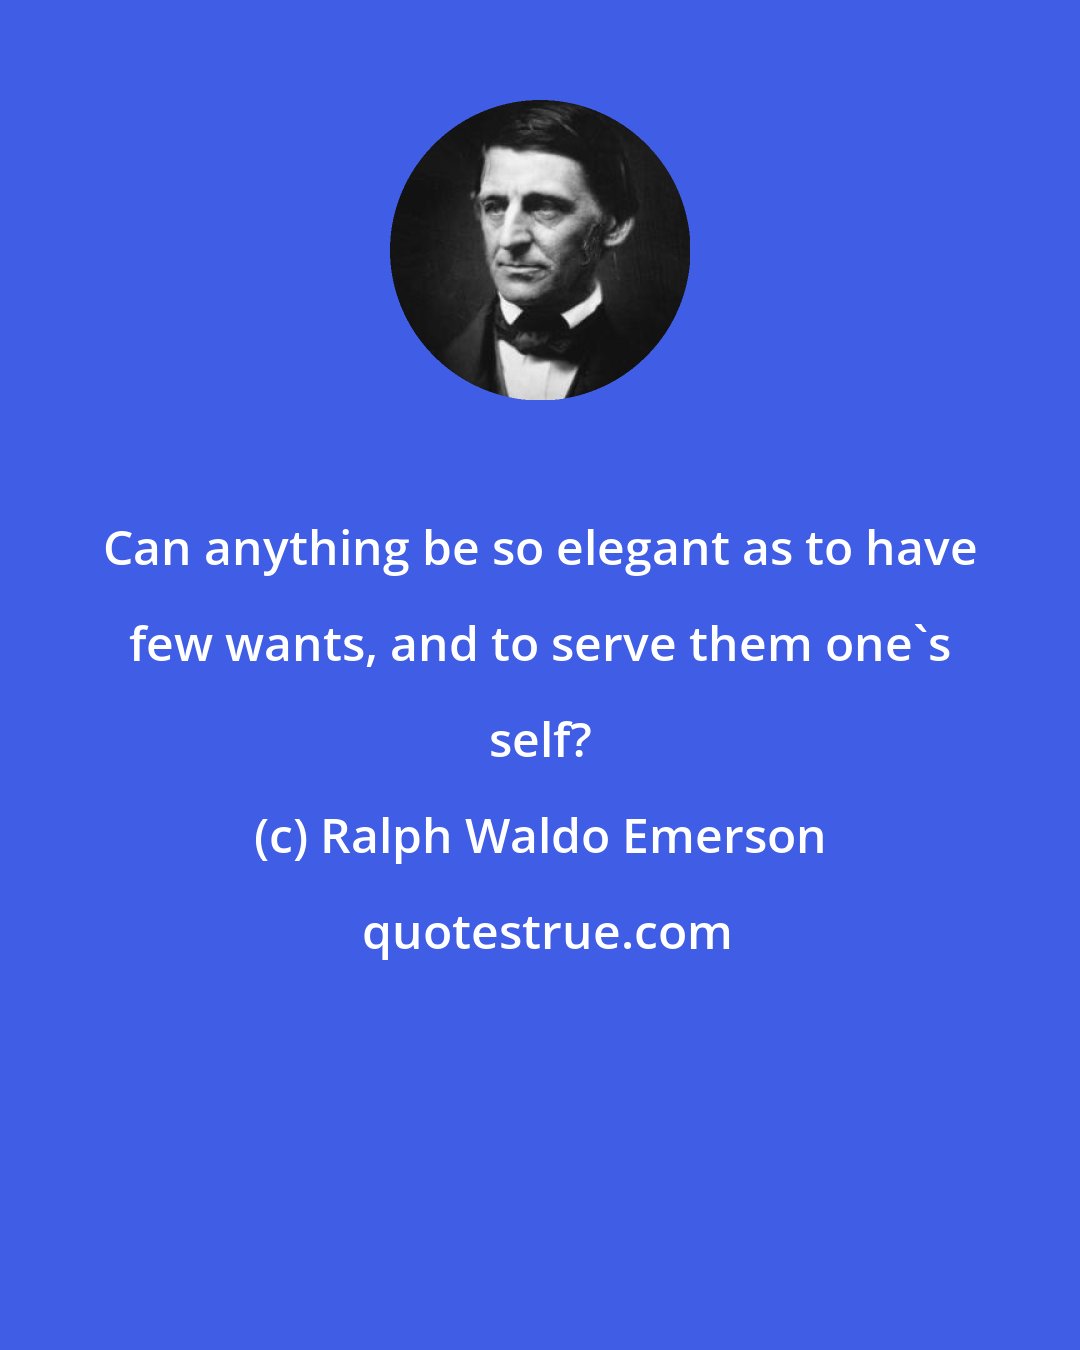 Ralph Waldo Emerson: Can anything be so elegant as to have few wants, and to serve them one's self?